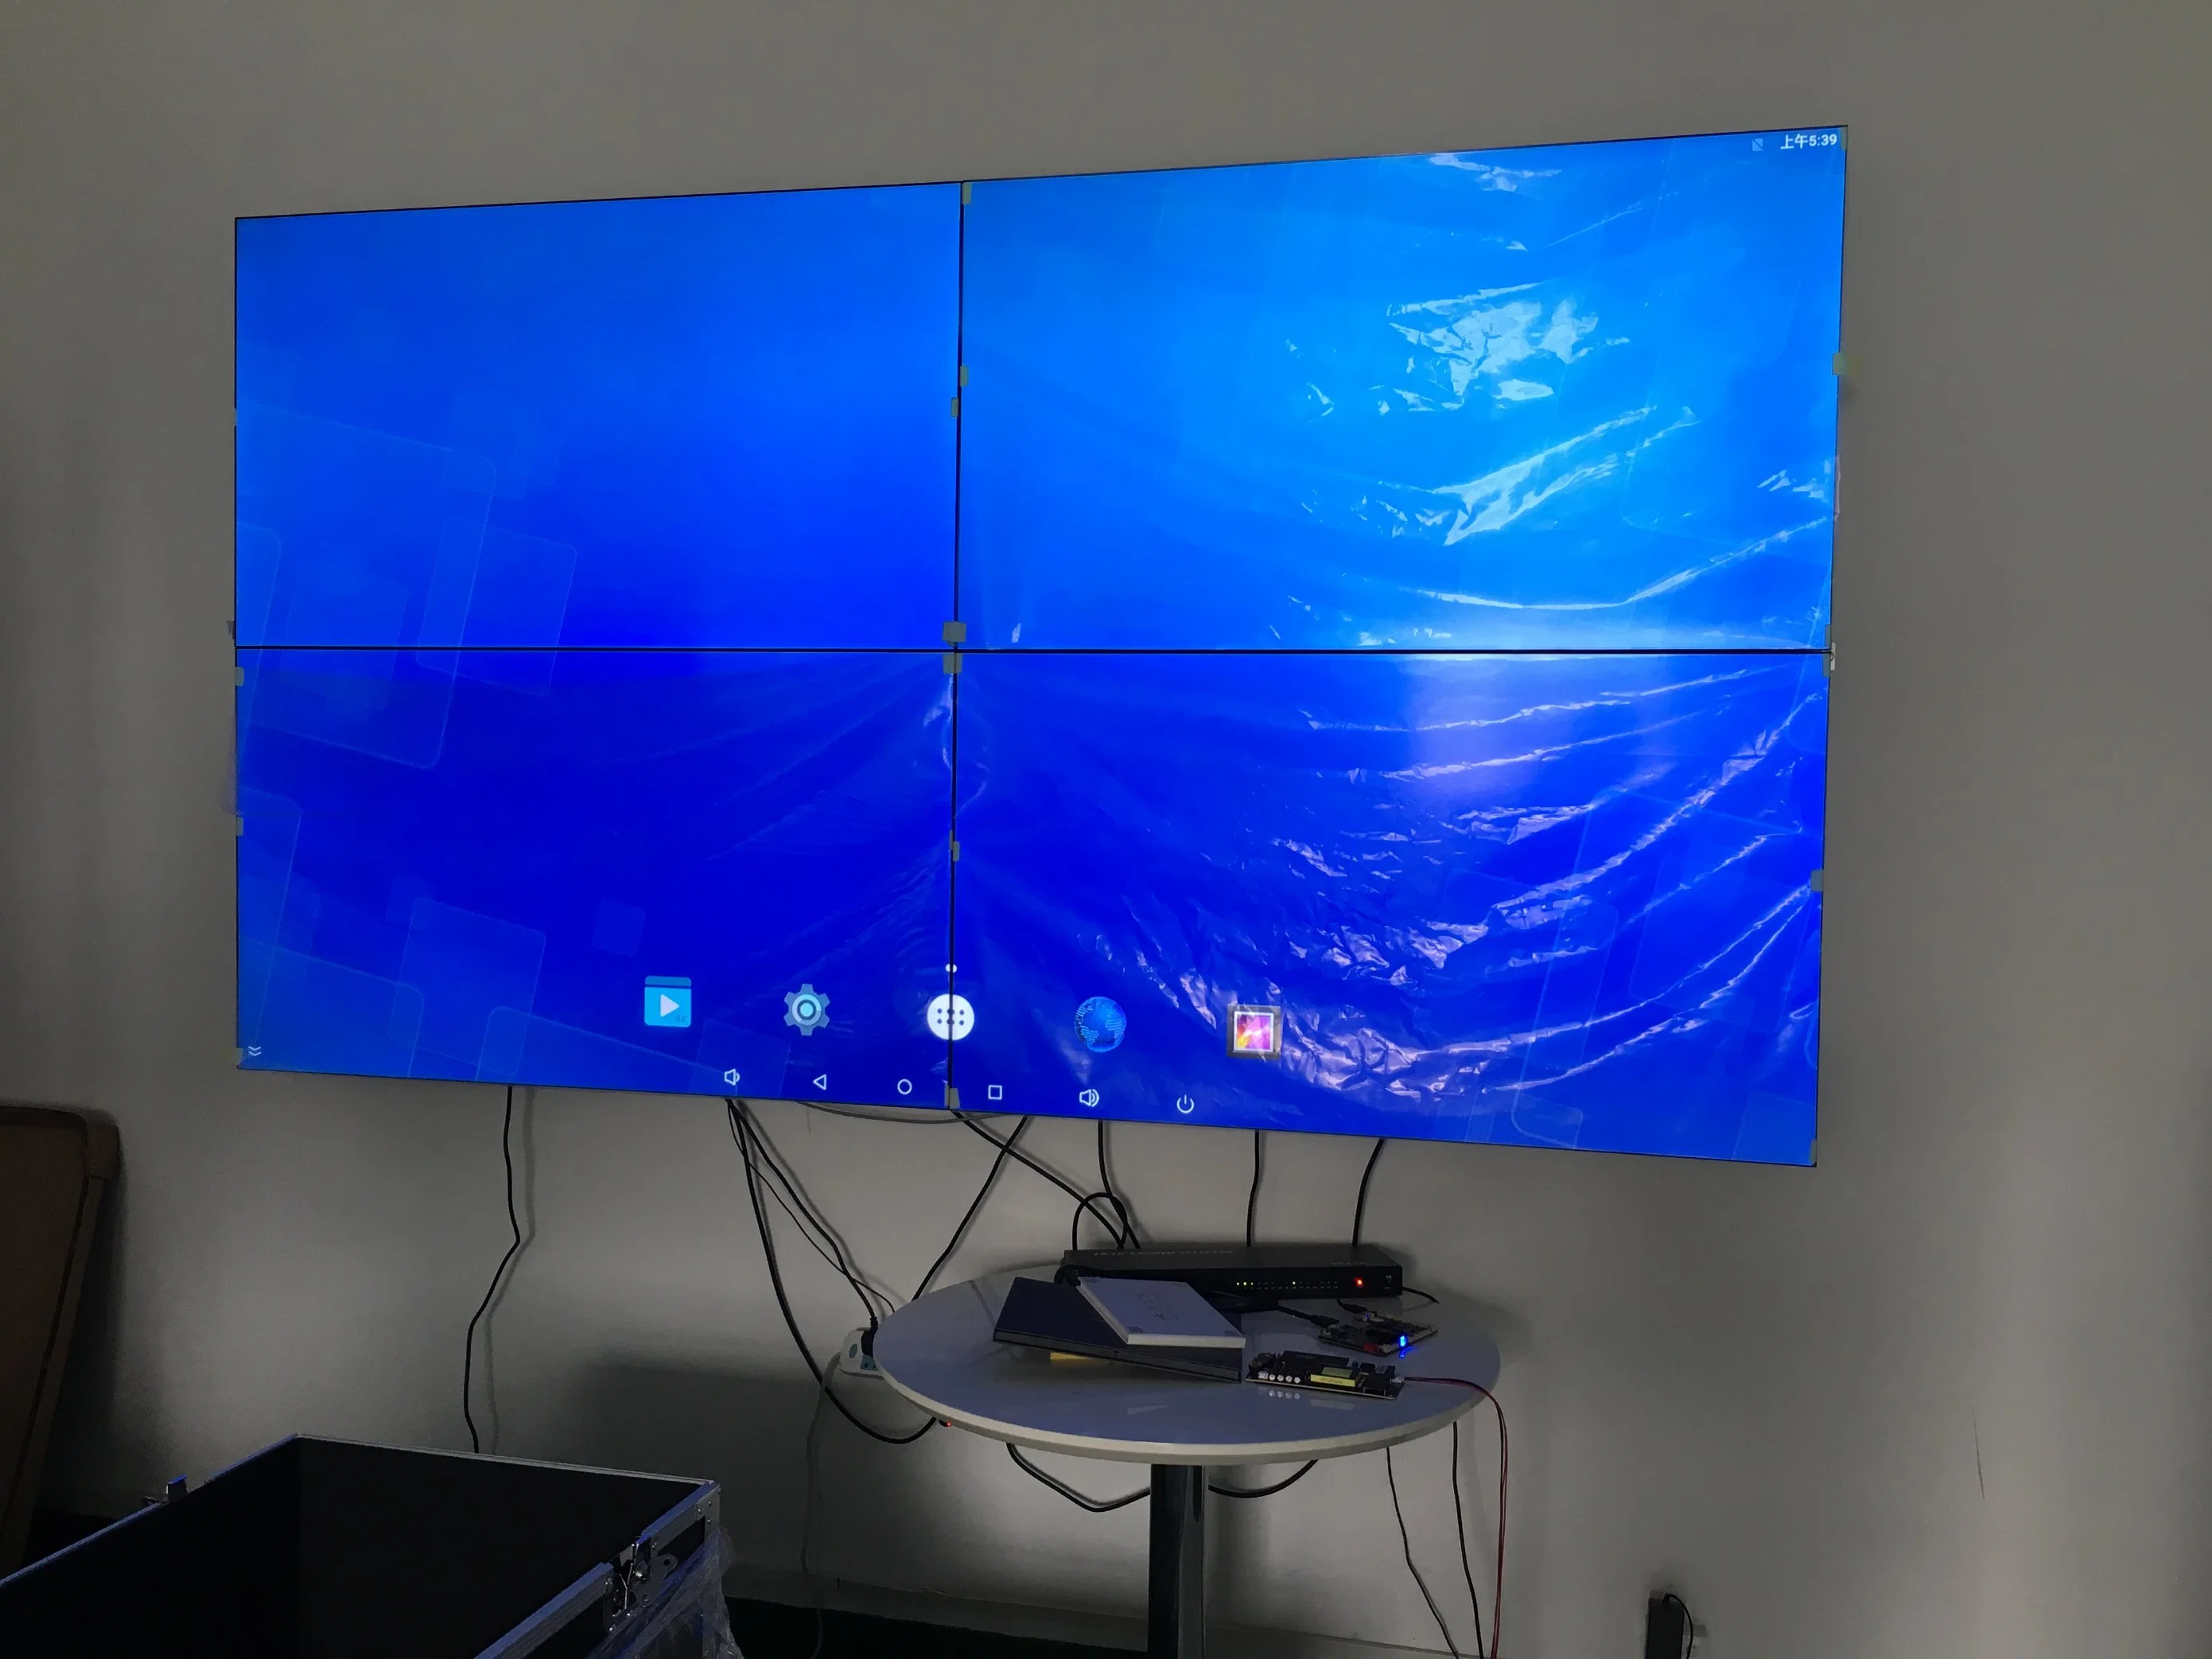 46inch LCD Display by LCD Video Wall Narrow Bezel